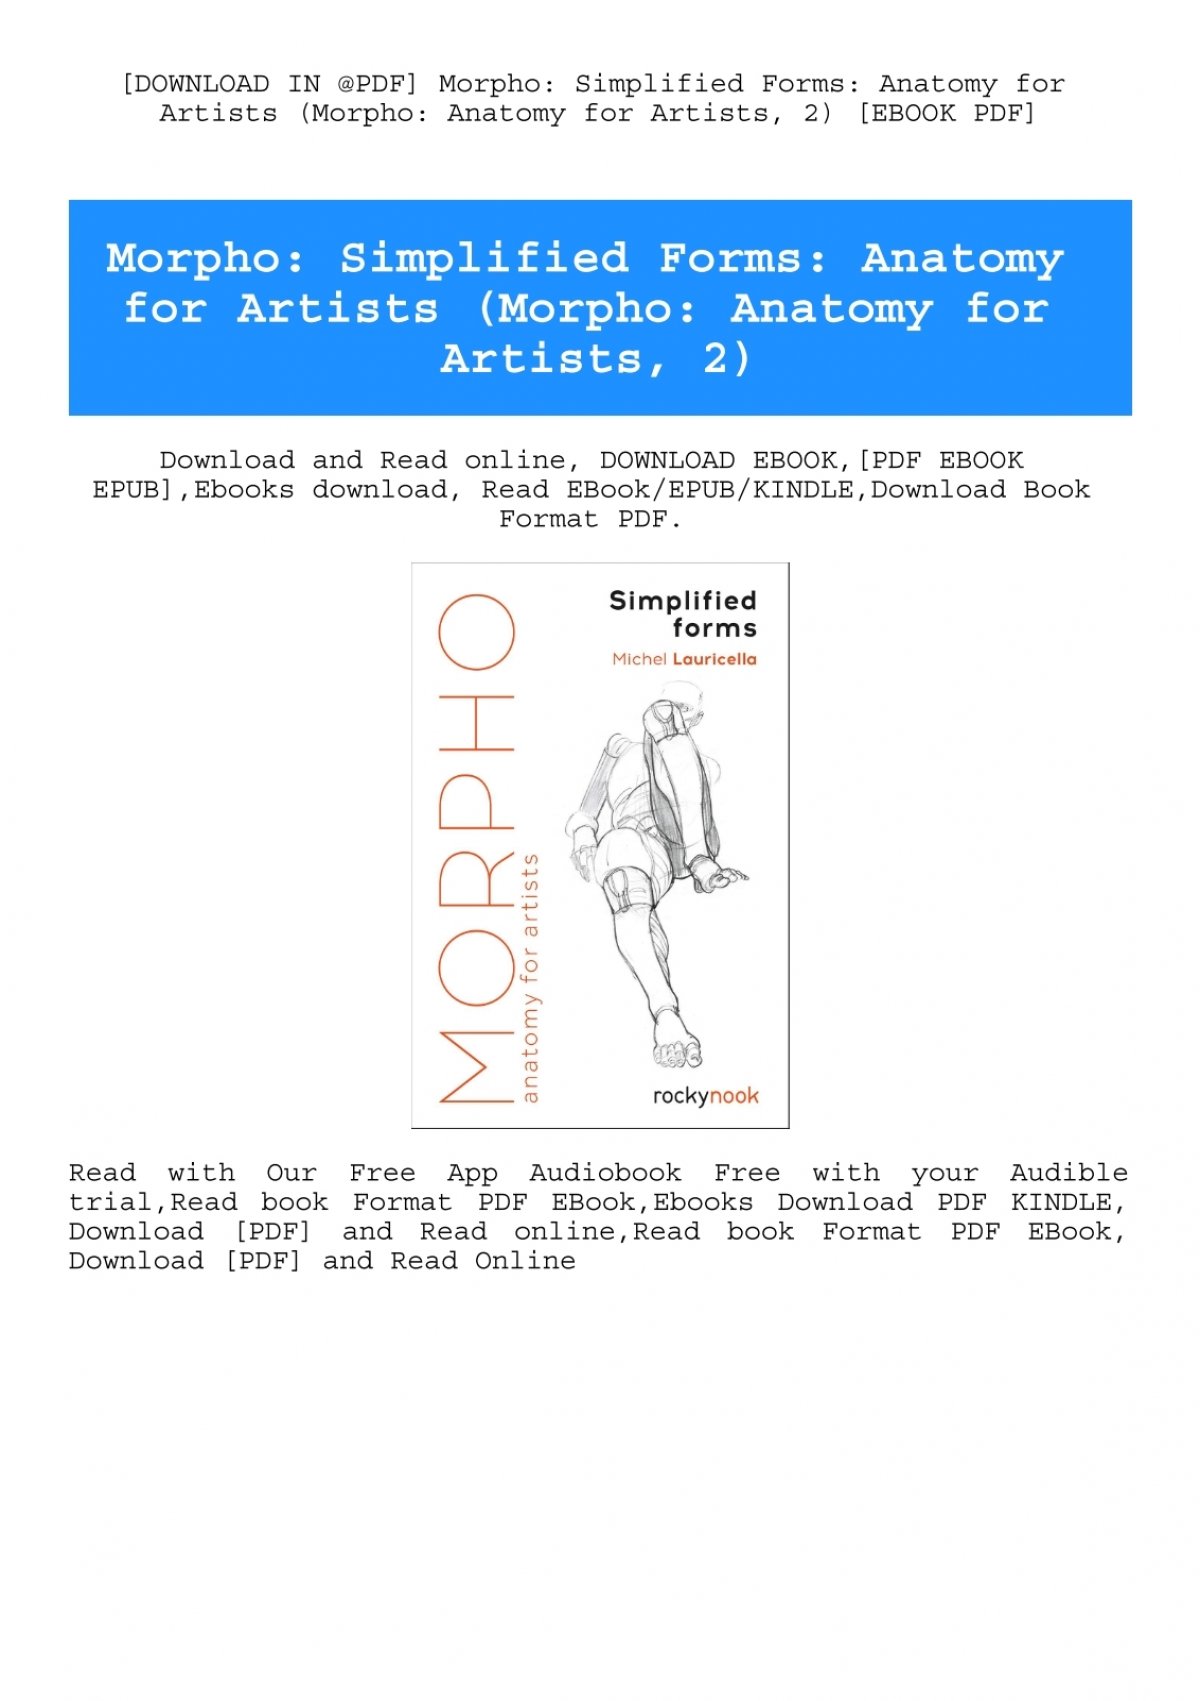 morpho-simplified-forms-anatomy-for-artists-morpho-anatomy-for-artists